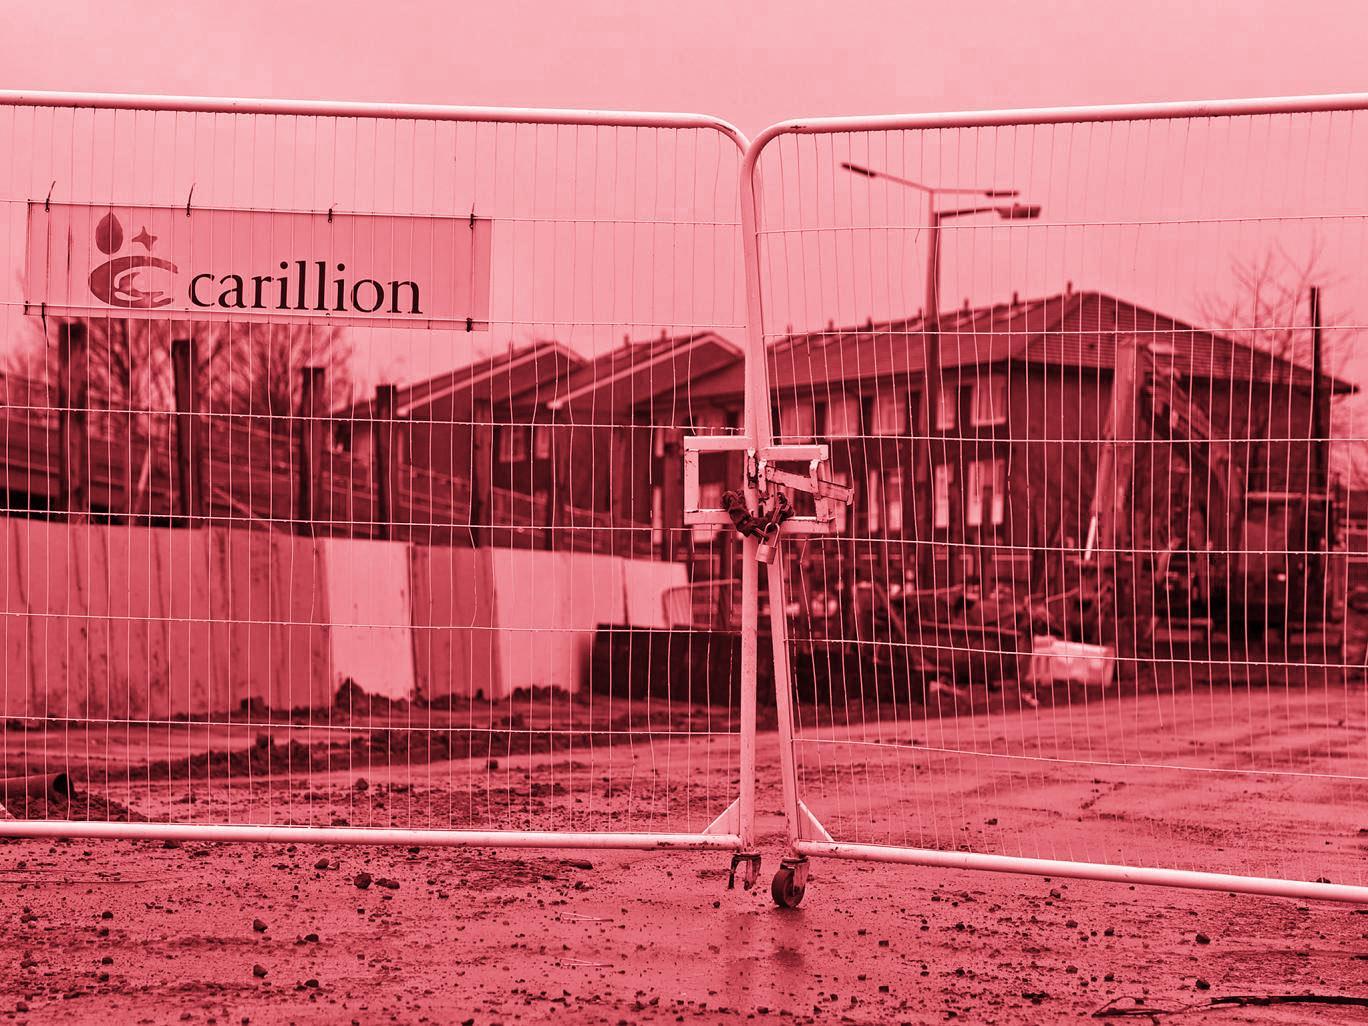 Carillion’s most recent annual report shows that it received around £253m in 2016 from various UK public private partnerships, mainly made up of PFIs